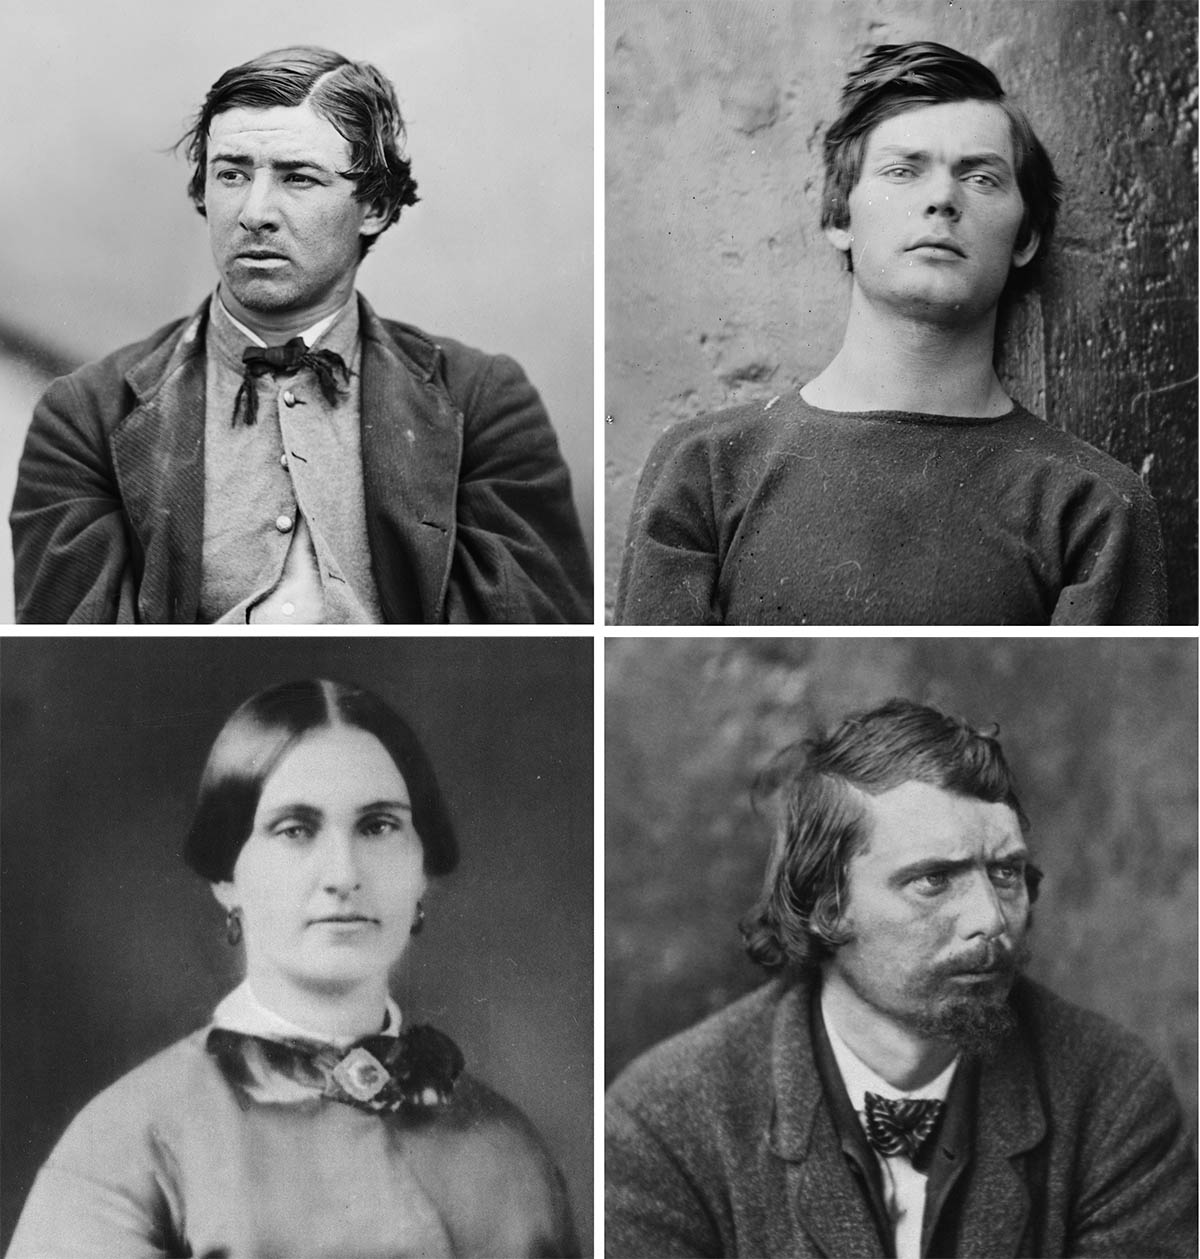 The four condemned Abraham Lincoln assassination conspirators: David Herold, Lewis Powell, Mary Surratt and George Atzerodt (from left to right).